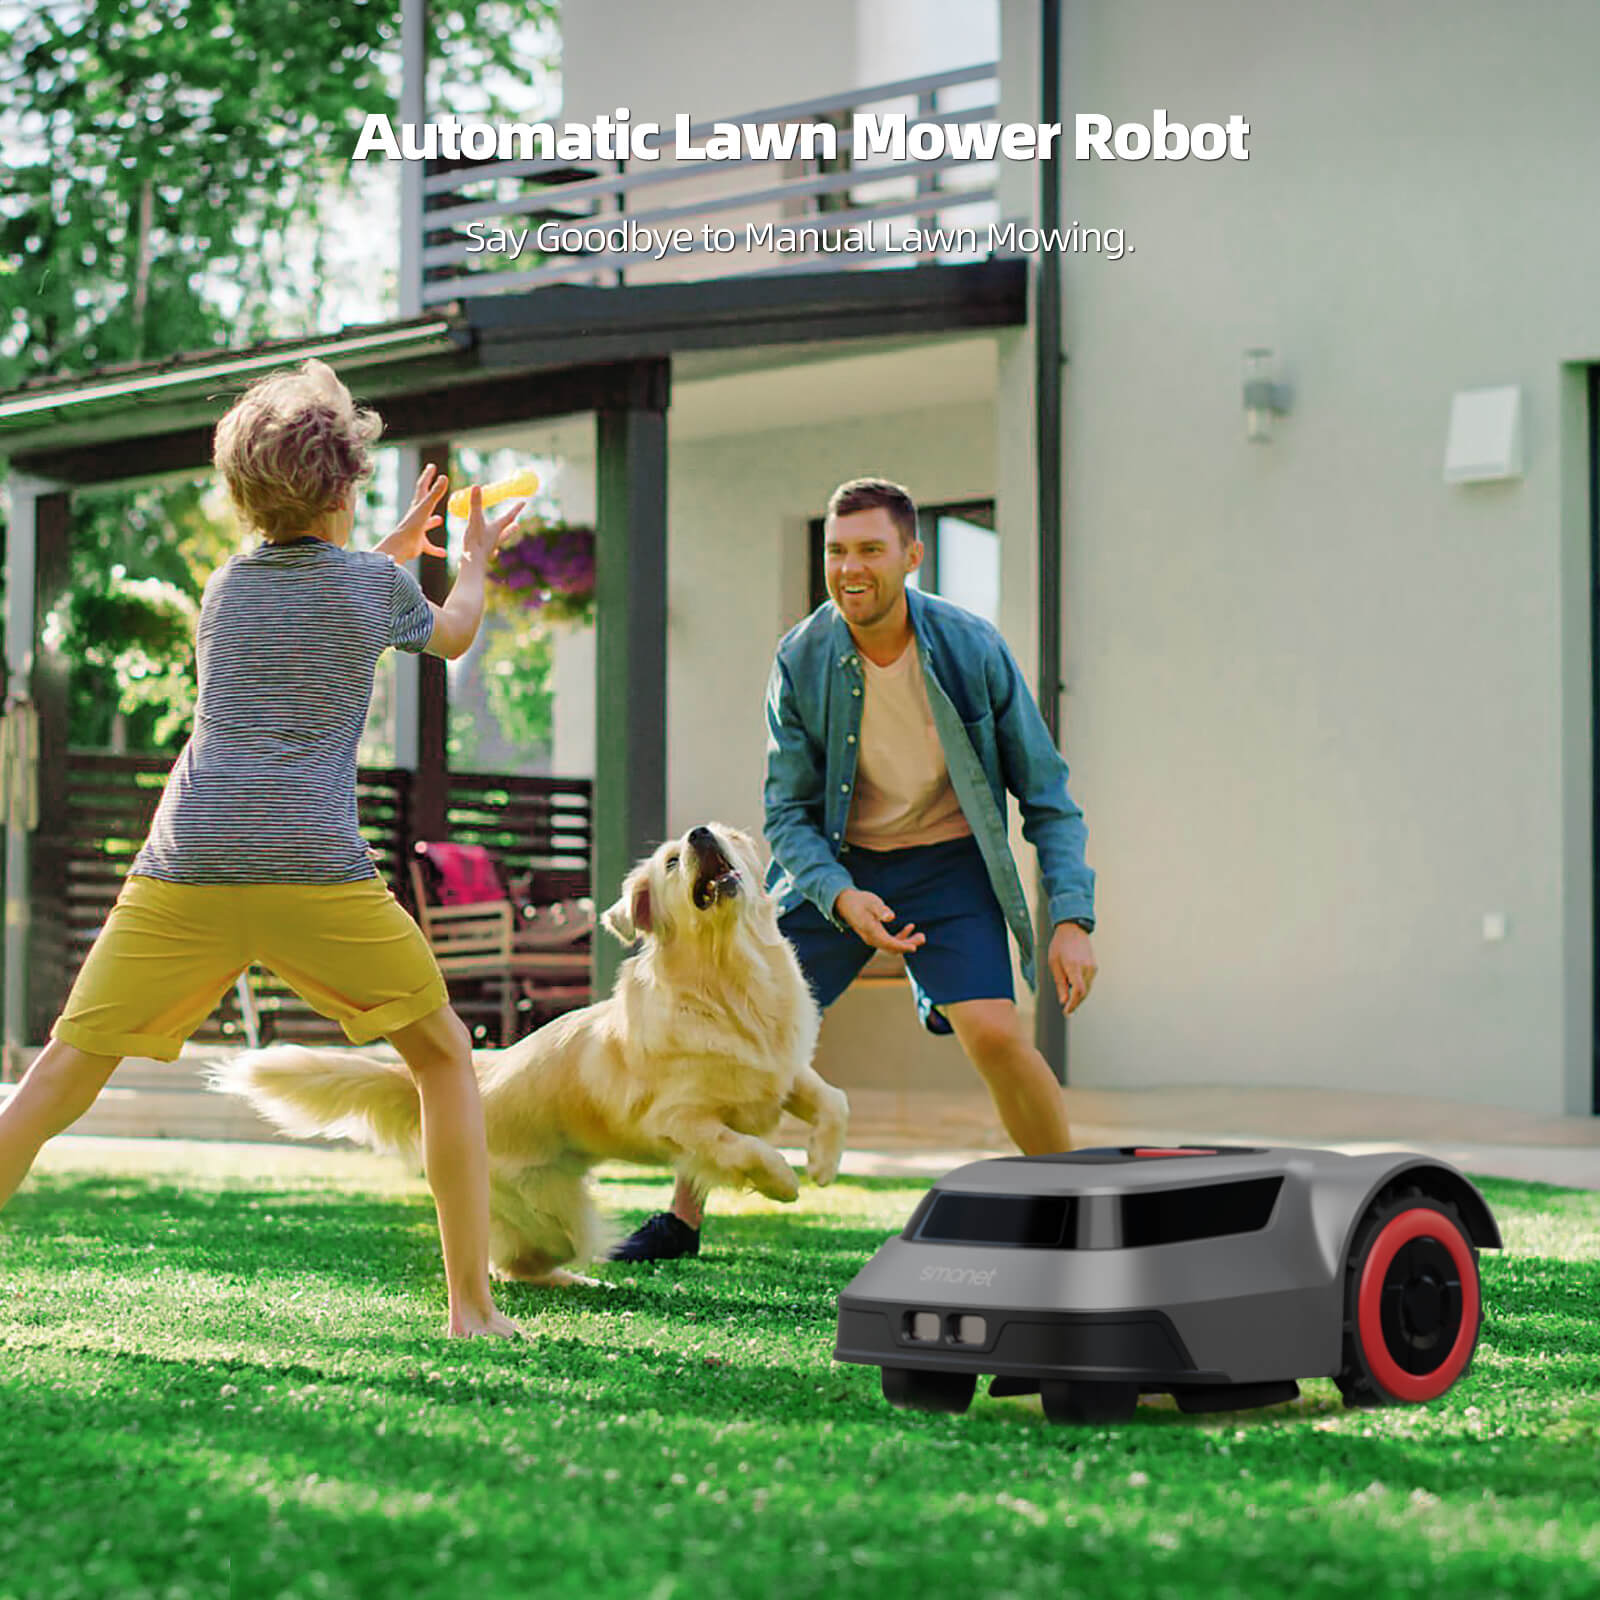 SMONET RLM1000 Electric Lawn Mower Automatic Lawn Mower Robot Say Goodbye to Manual Lawn Mowing.